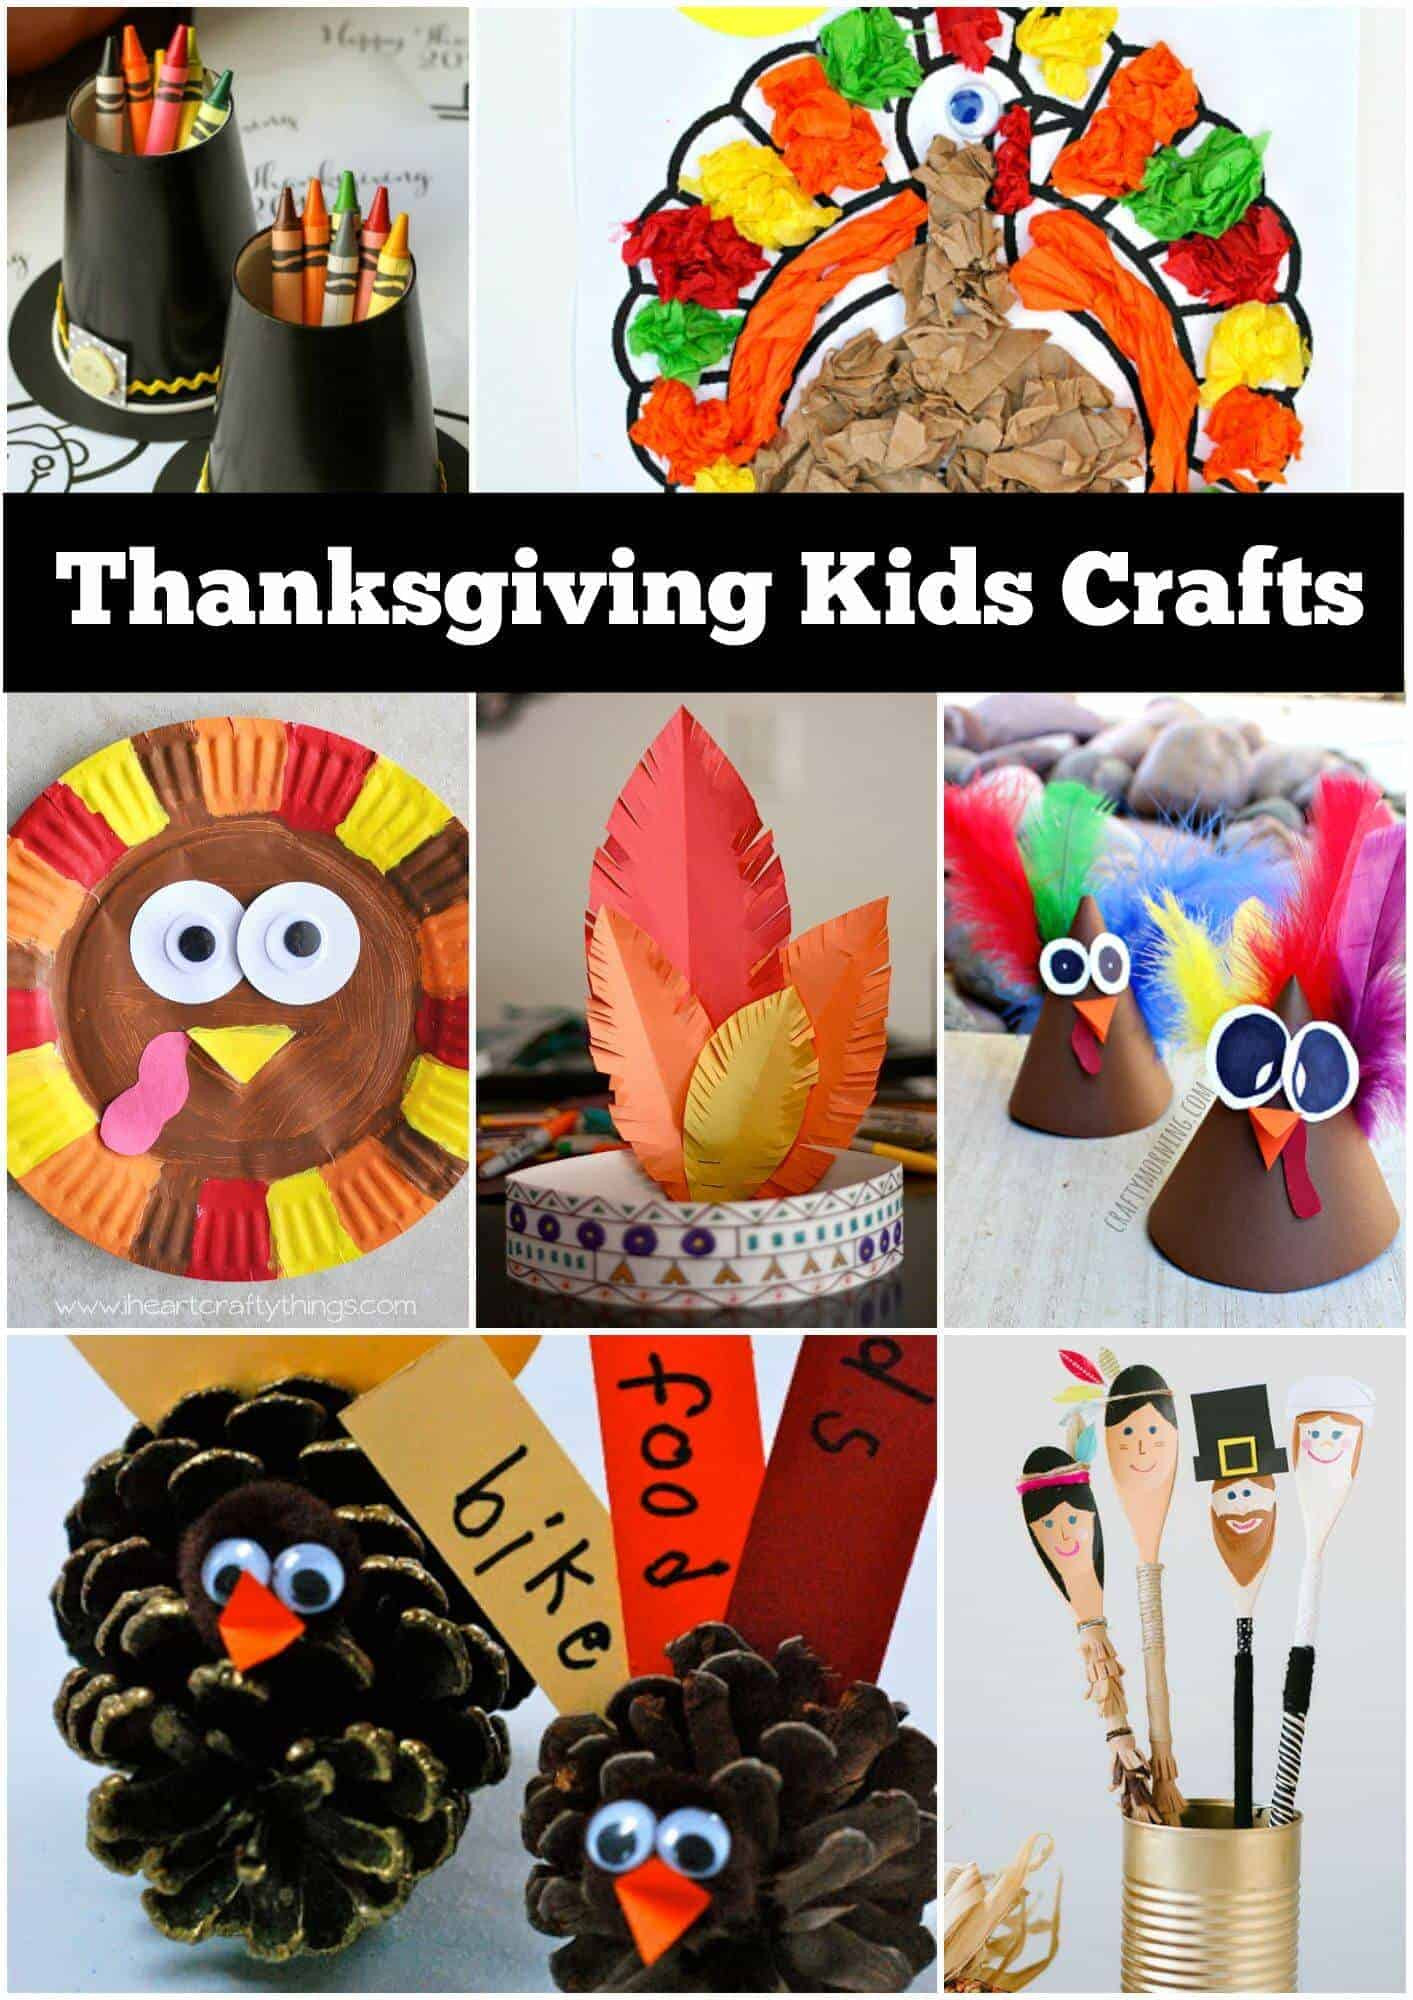 Thanksgiving Art And Craft Ideas For Toddlers
 12 Thanksgiving Craft Ideas for kids Page 2 of 2